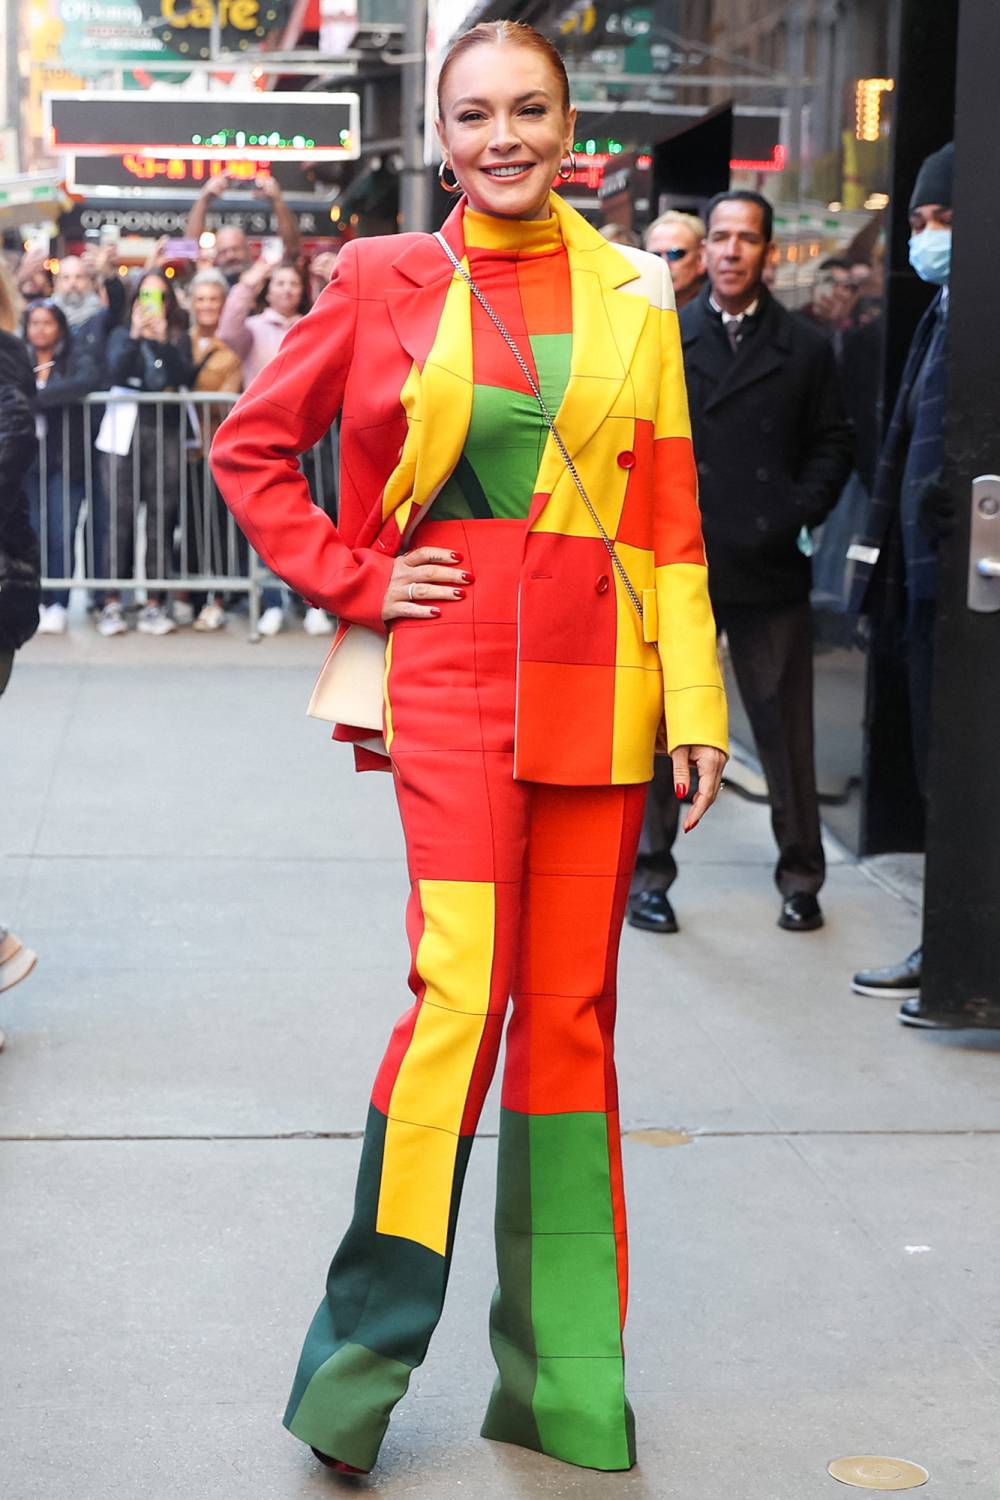 Lindsay Lohan Is a Vibrant Sight in Color Blocking Suit